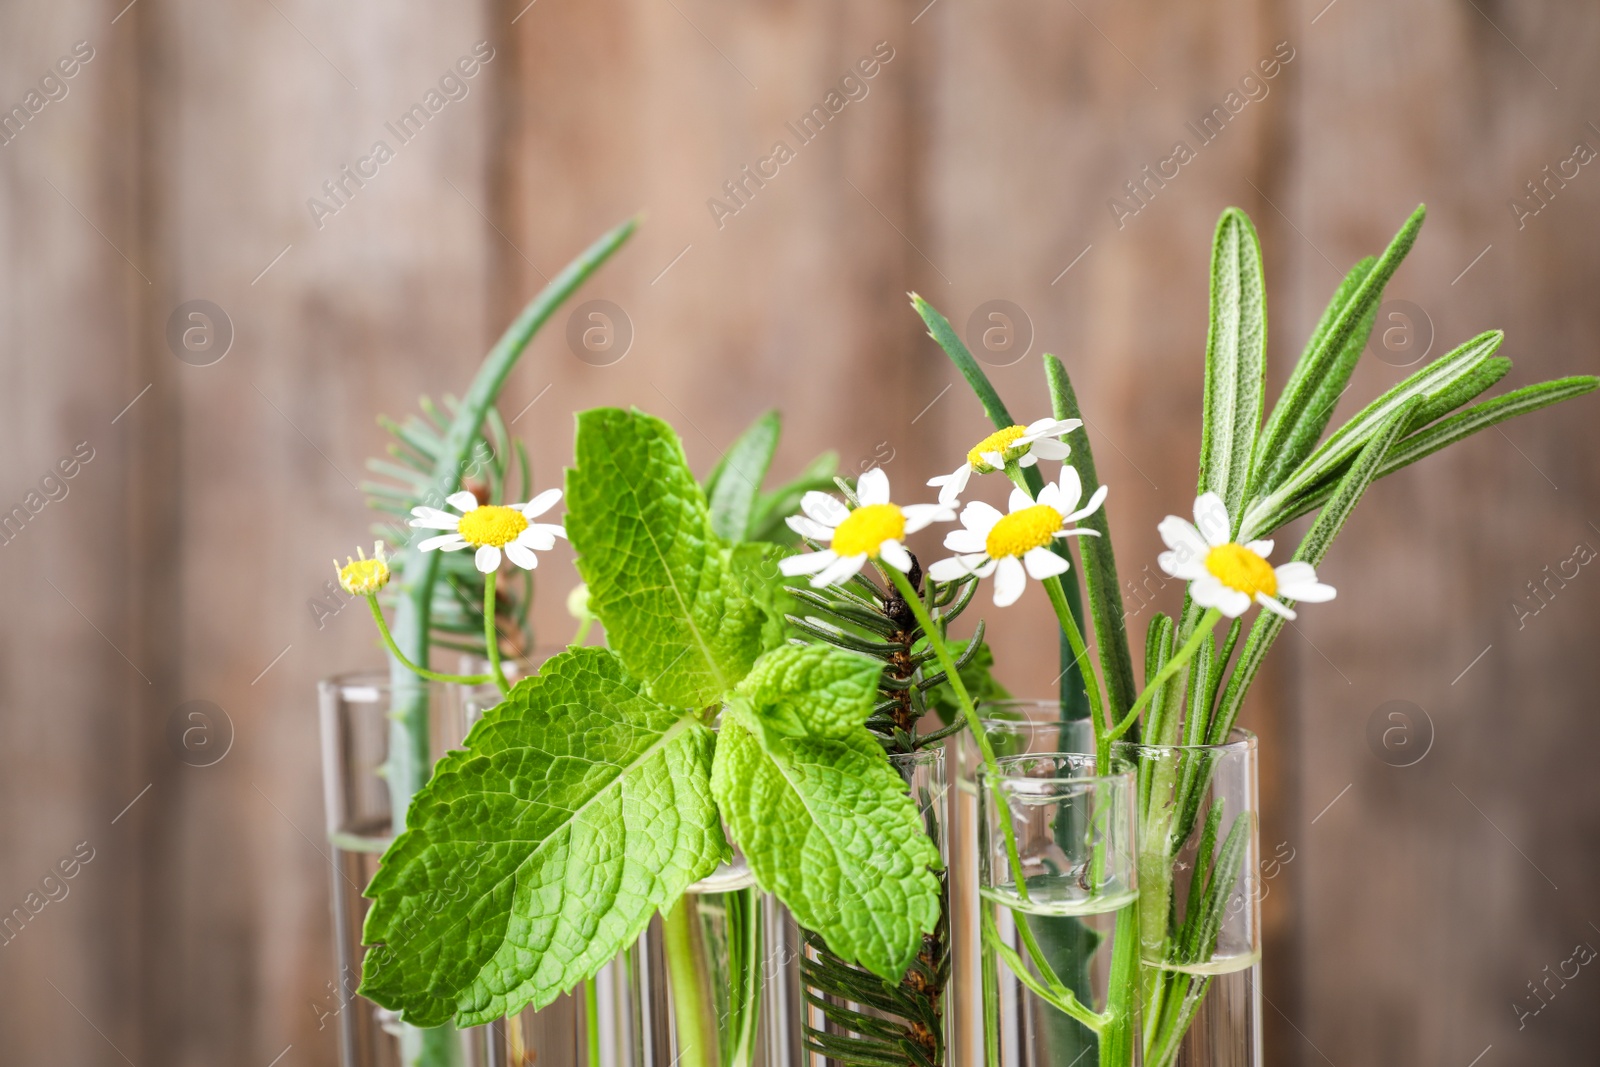 Photo of Test tubes of different essential oils with plants against blurred background, closeup